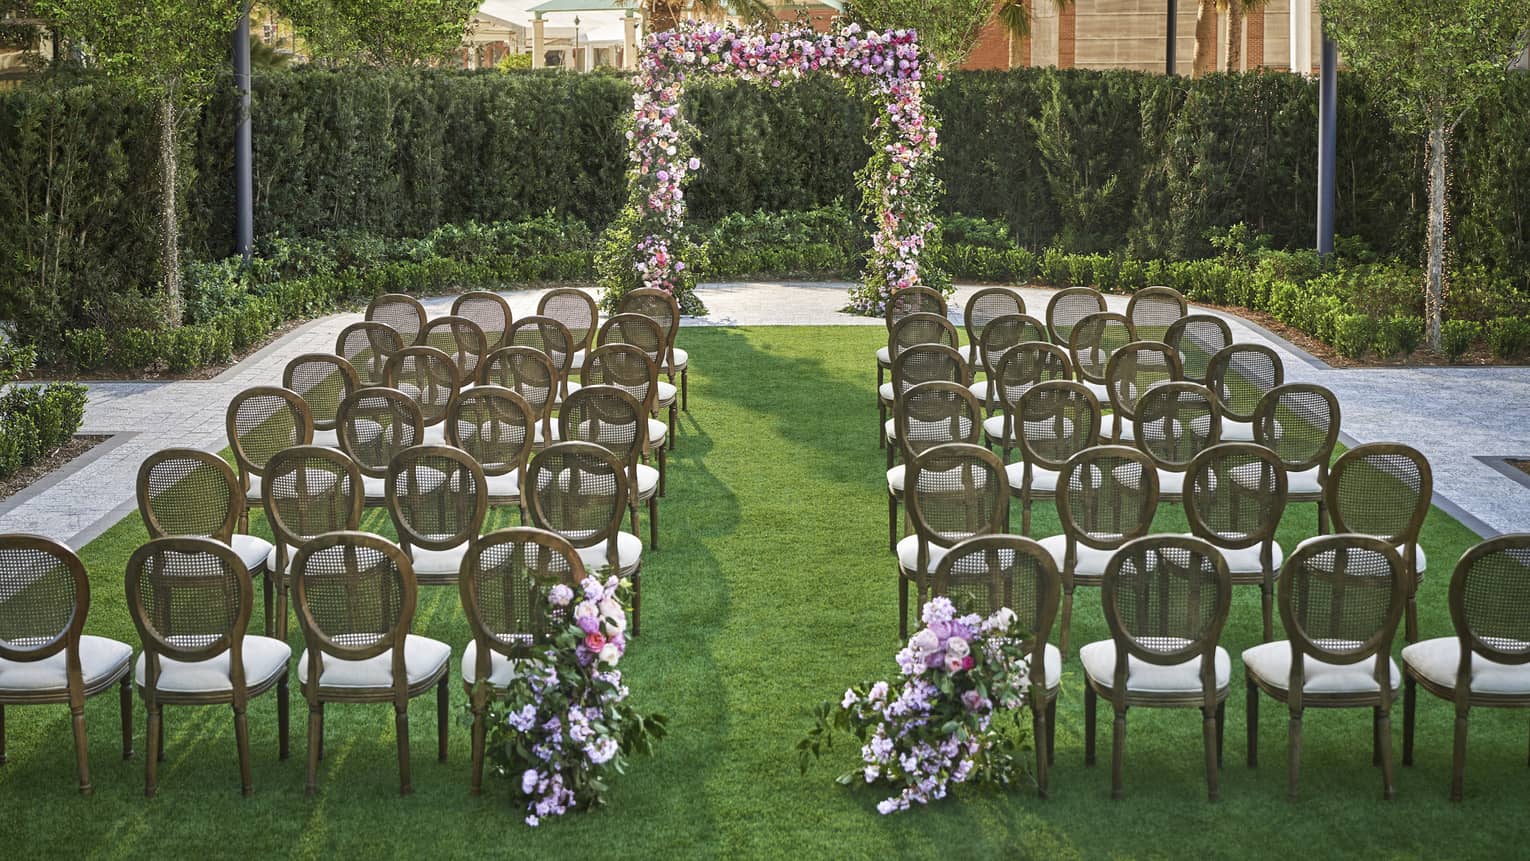 Lawn set up for wedding ceremony with rows of chairs, flower arch and rounded hedges